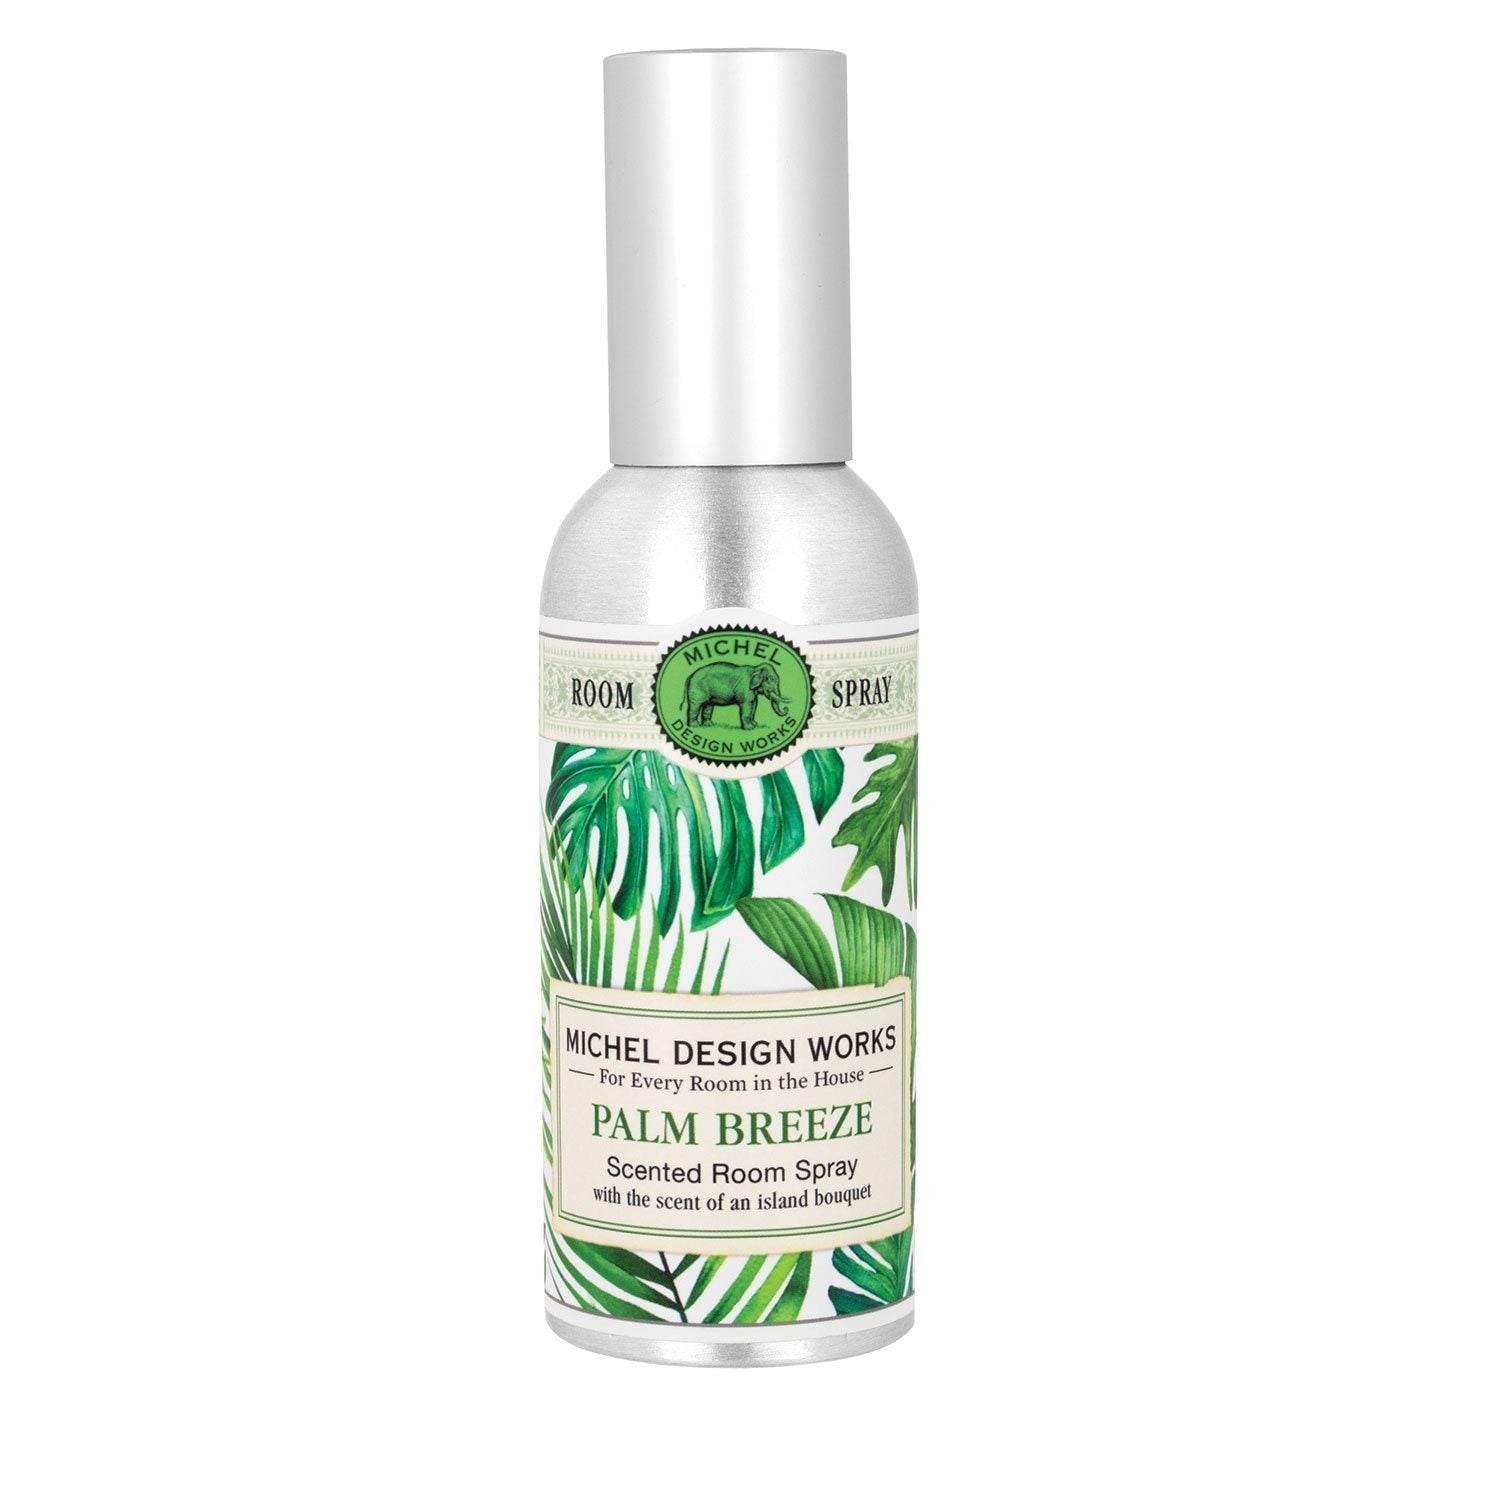 Palm Breeze - Scented Room Spray    